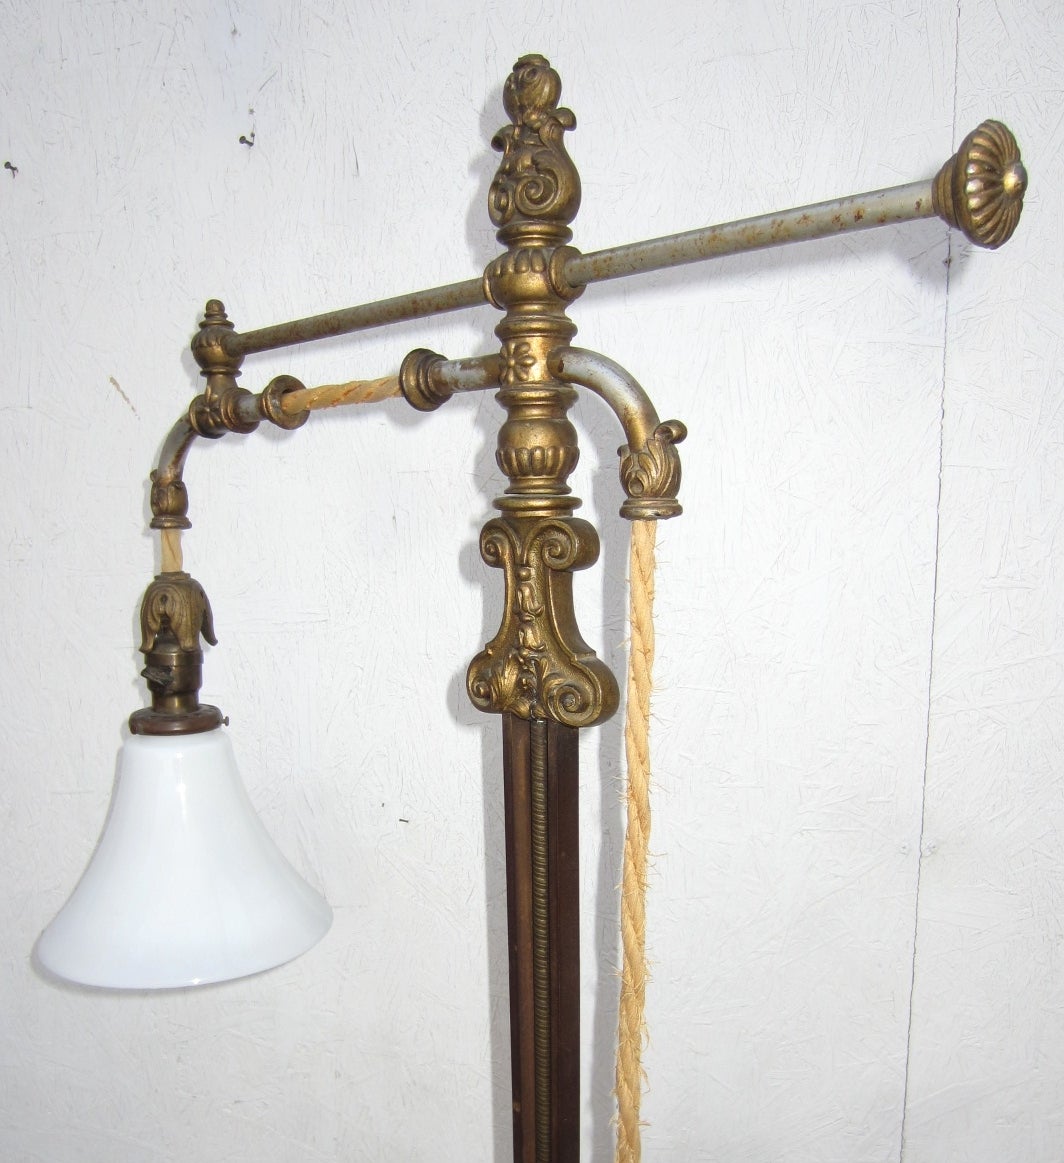 Incredible floor lamp which moves forward and back and up and down via a push rod and hemp rope with weighted tassel(see pictures).
Heavy steel and iron construction with black marble base. 
Fluted milk glass shade.
Provenance, from Masonic lodge